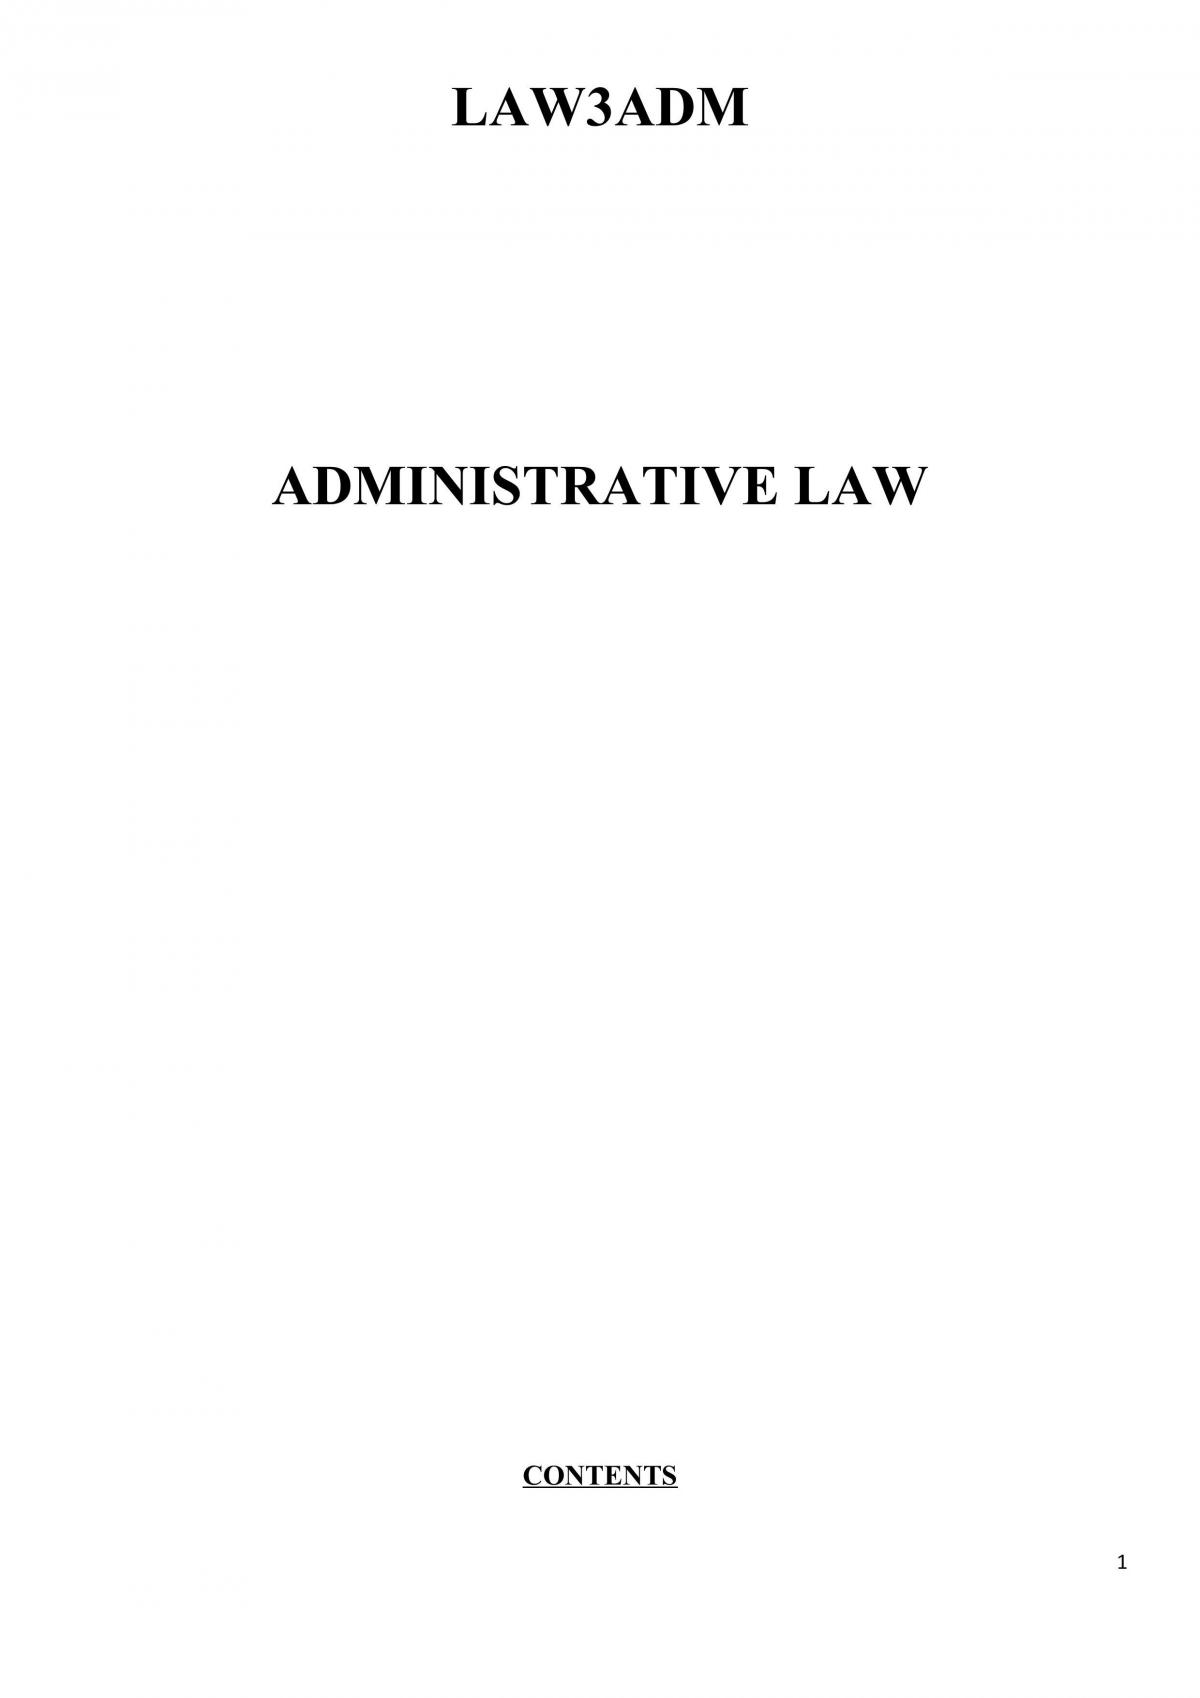 Administrative Law extensive exam notes - Page 1